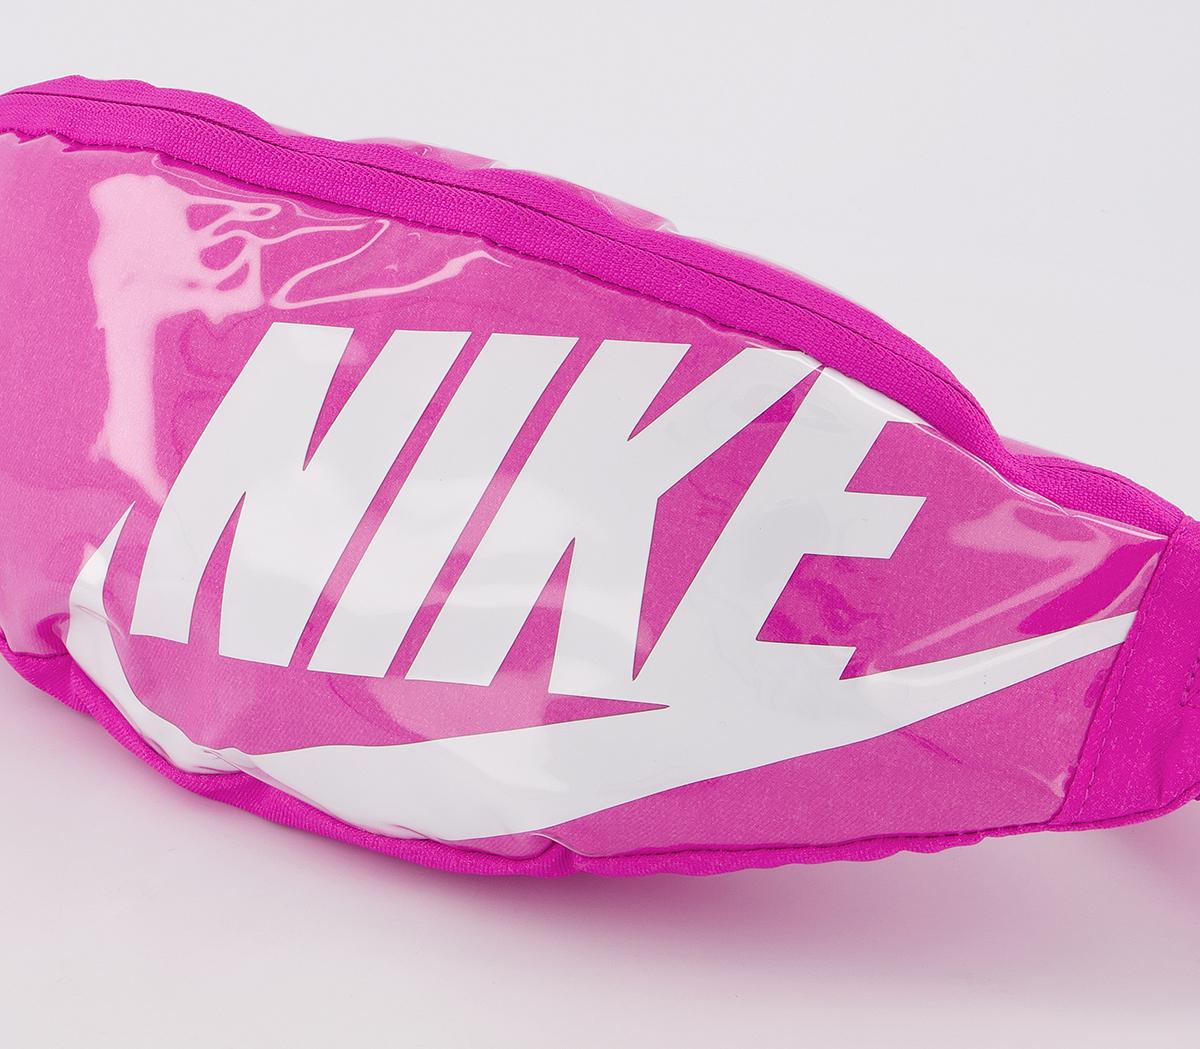 nike fanny pack pink